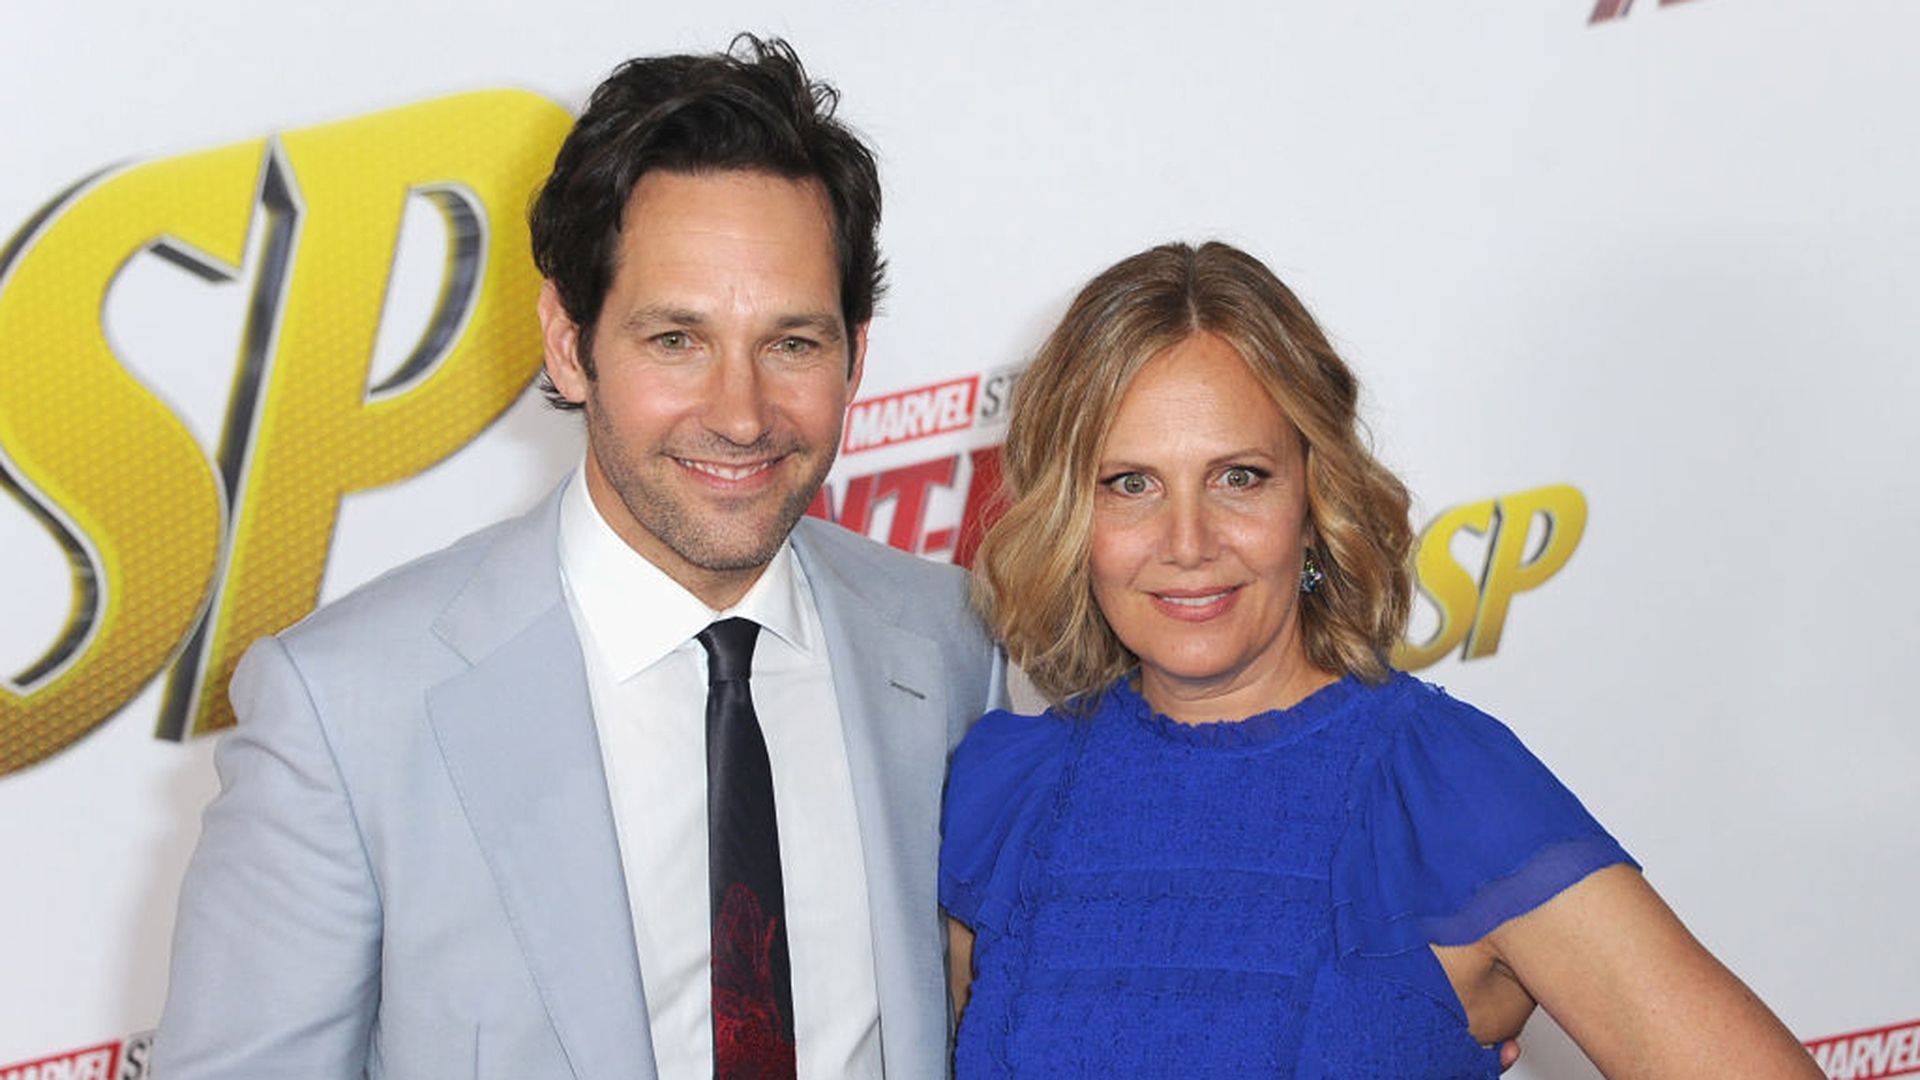 Actor Paul Rudd and wife Julie Yaeger arrive for the Premiere Of Disney And Marvel's "Ant-Man And The Wasp" in 2018